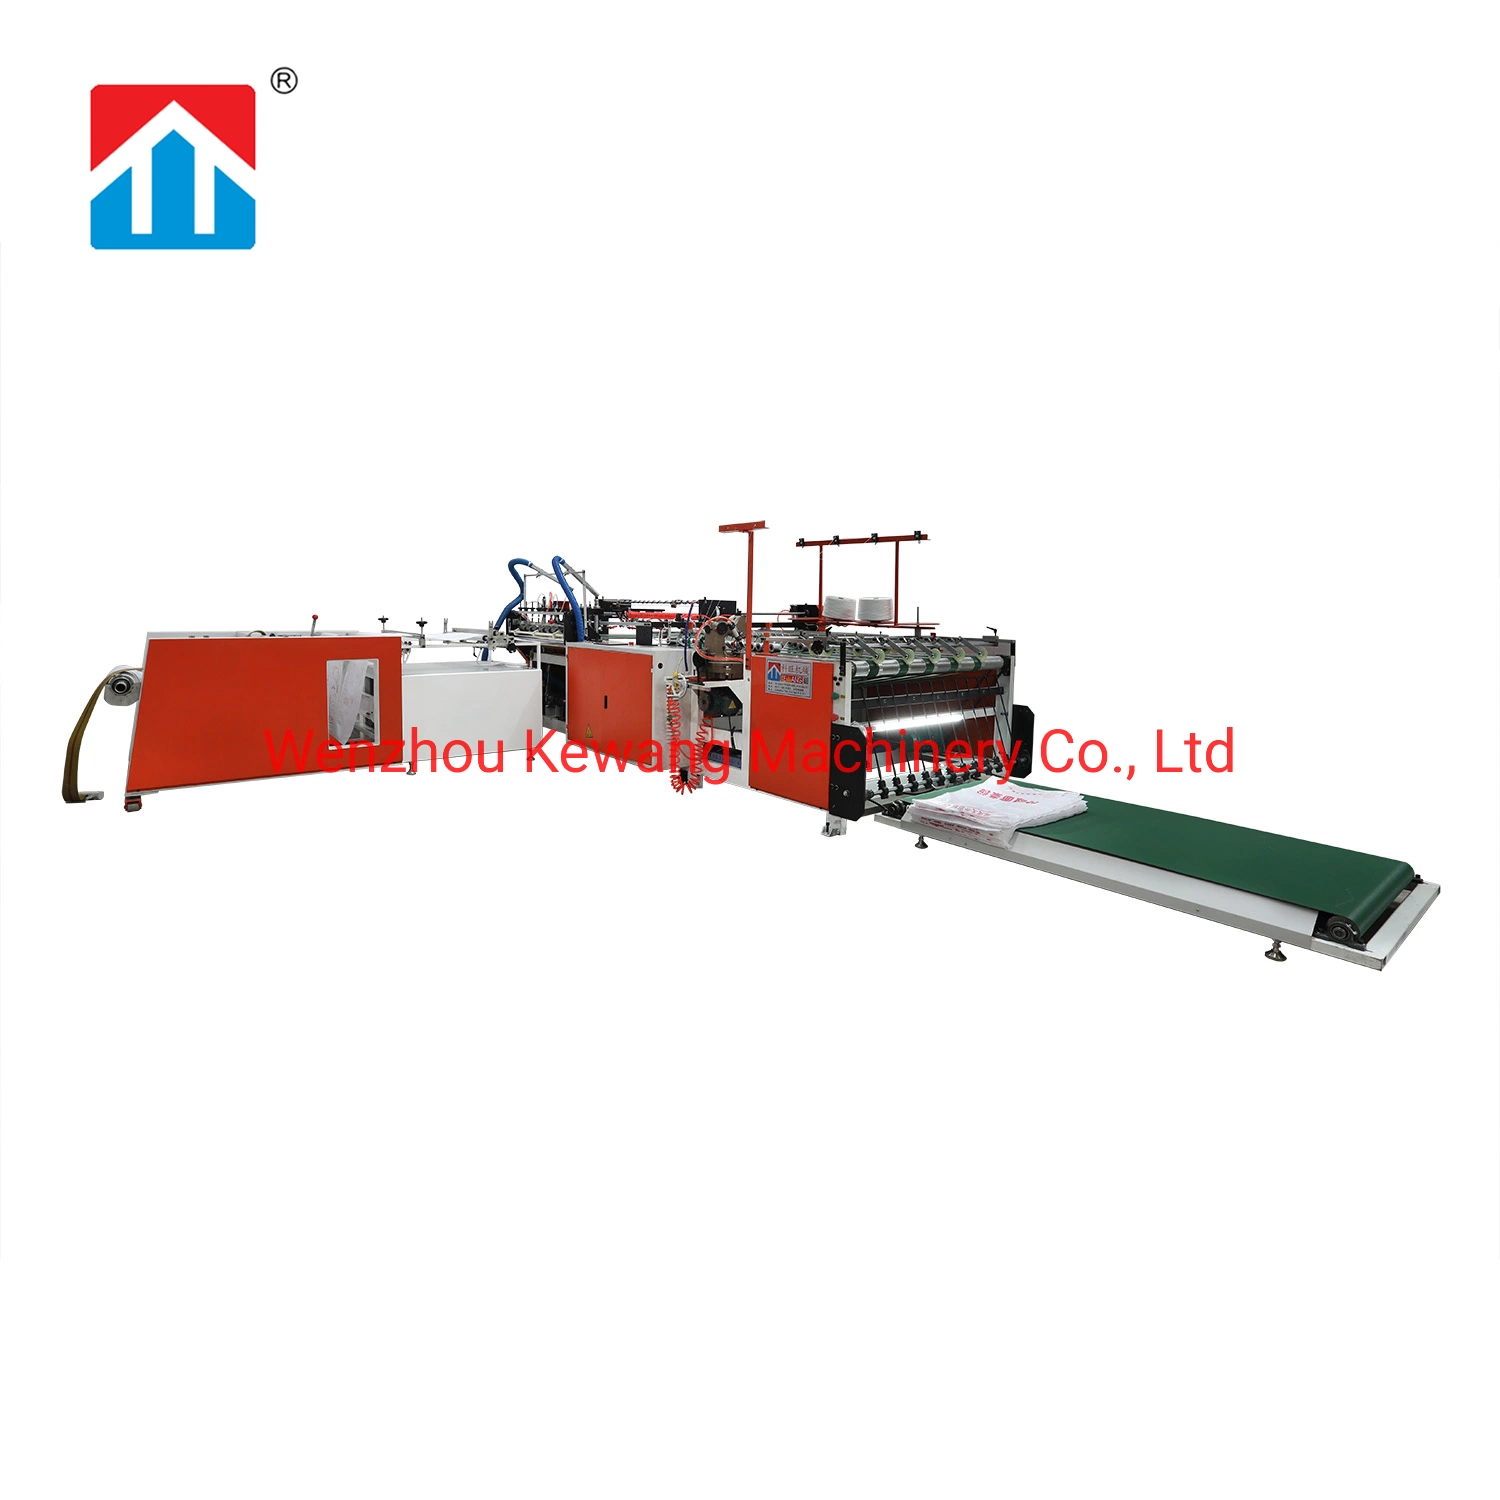 Automatic Heat Cutting and Sewing for PP Woven Bag Making Machine